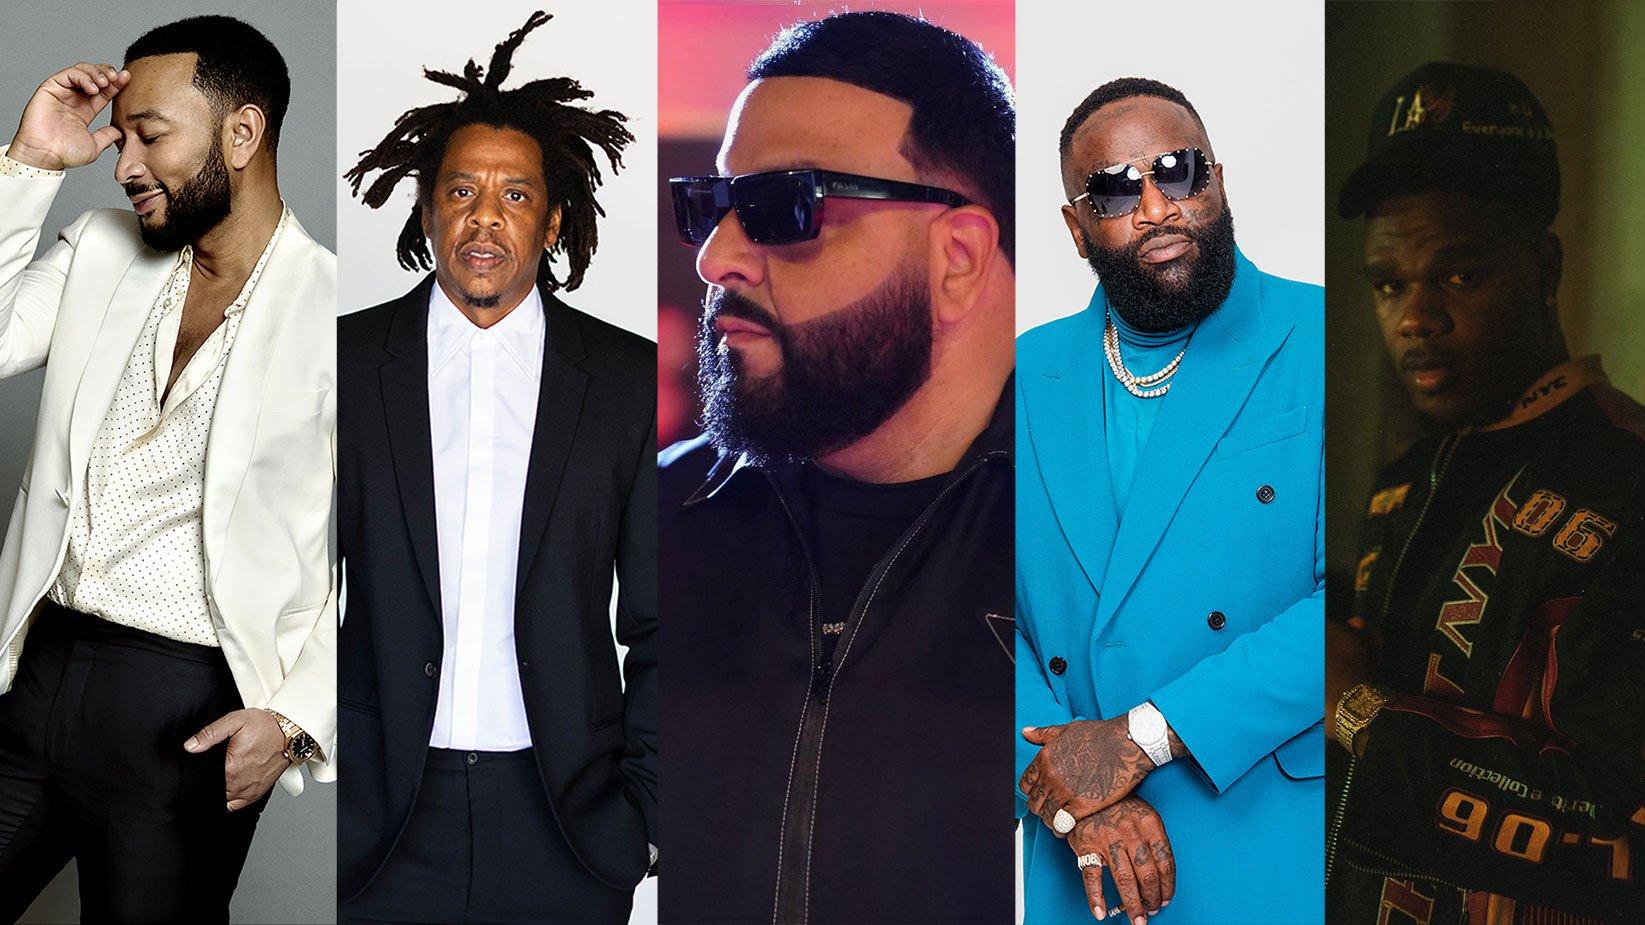 DJ Khaled To Perform “God Did” At 2023 GRAMMYs With Musical Collaborators  Fridayy, Jay-Z, John Legend, Lil Wayne, And Rick Ross